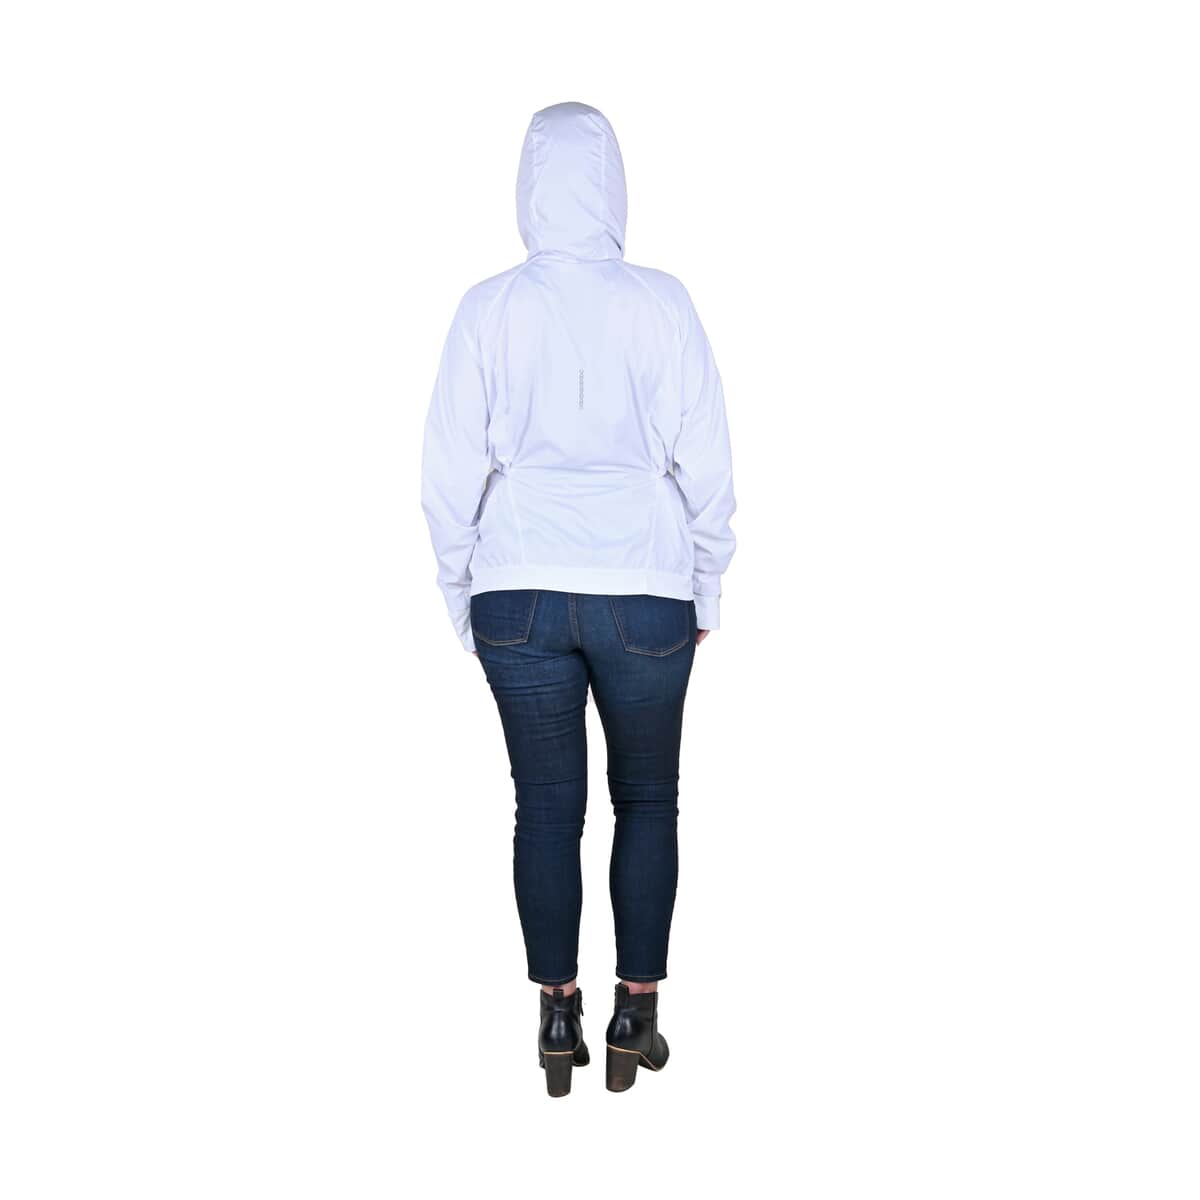 LAYER8 White Hooded Windbreaker - Large image number 1